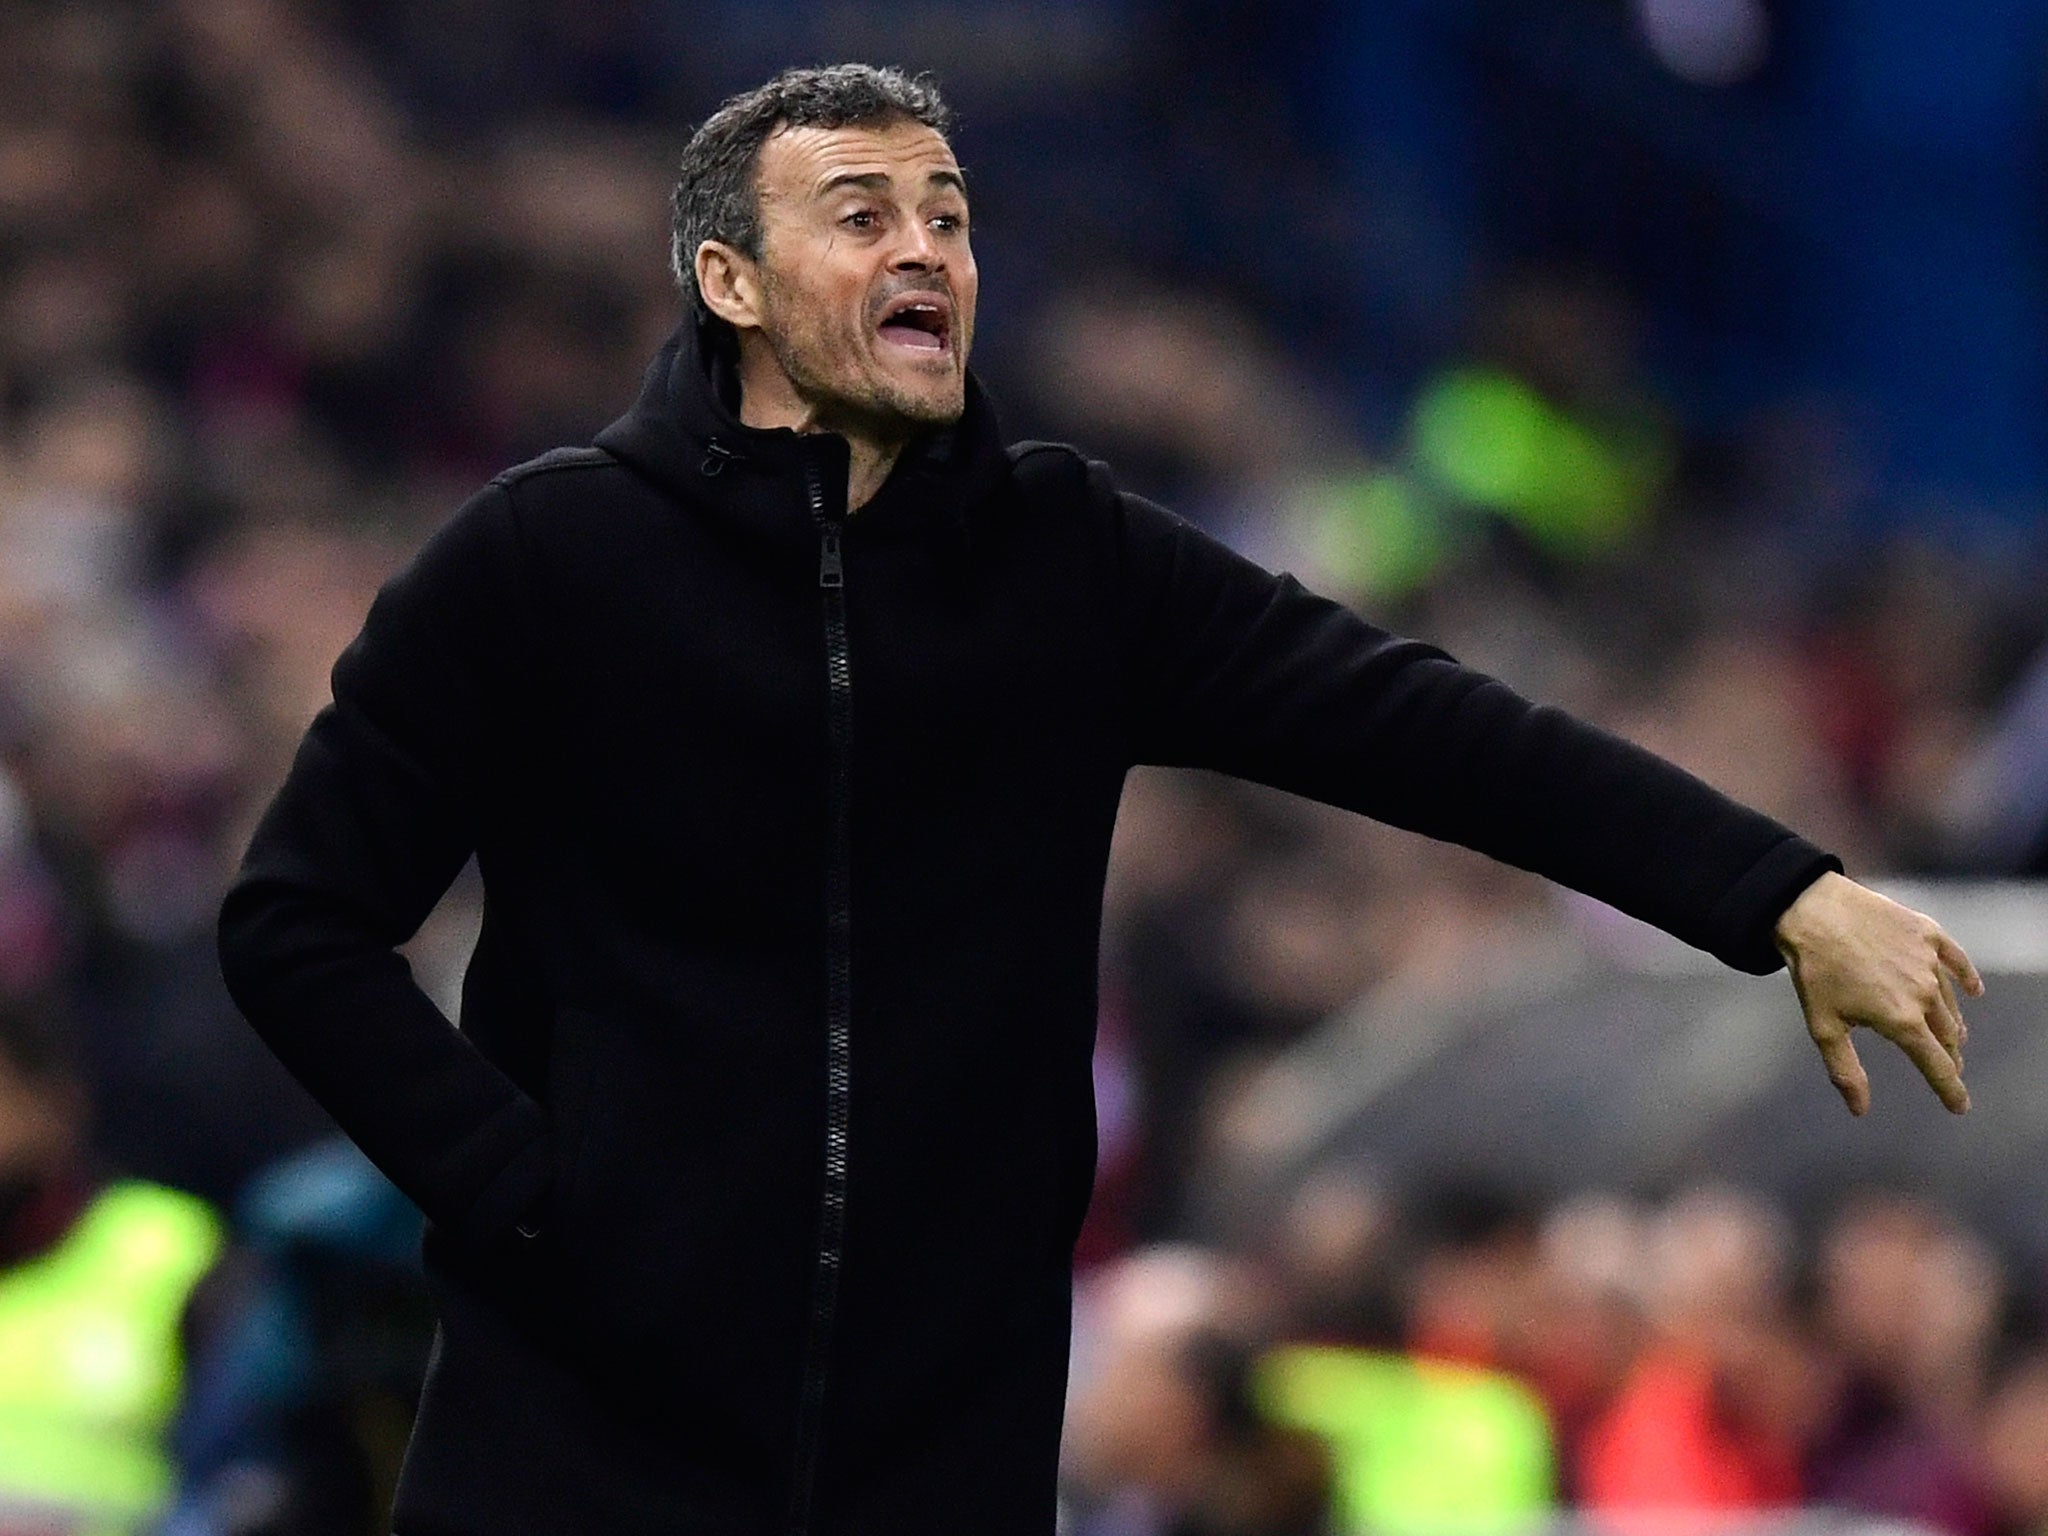 Luis Enrique has overseen a sharp decline in the Barcelona squad